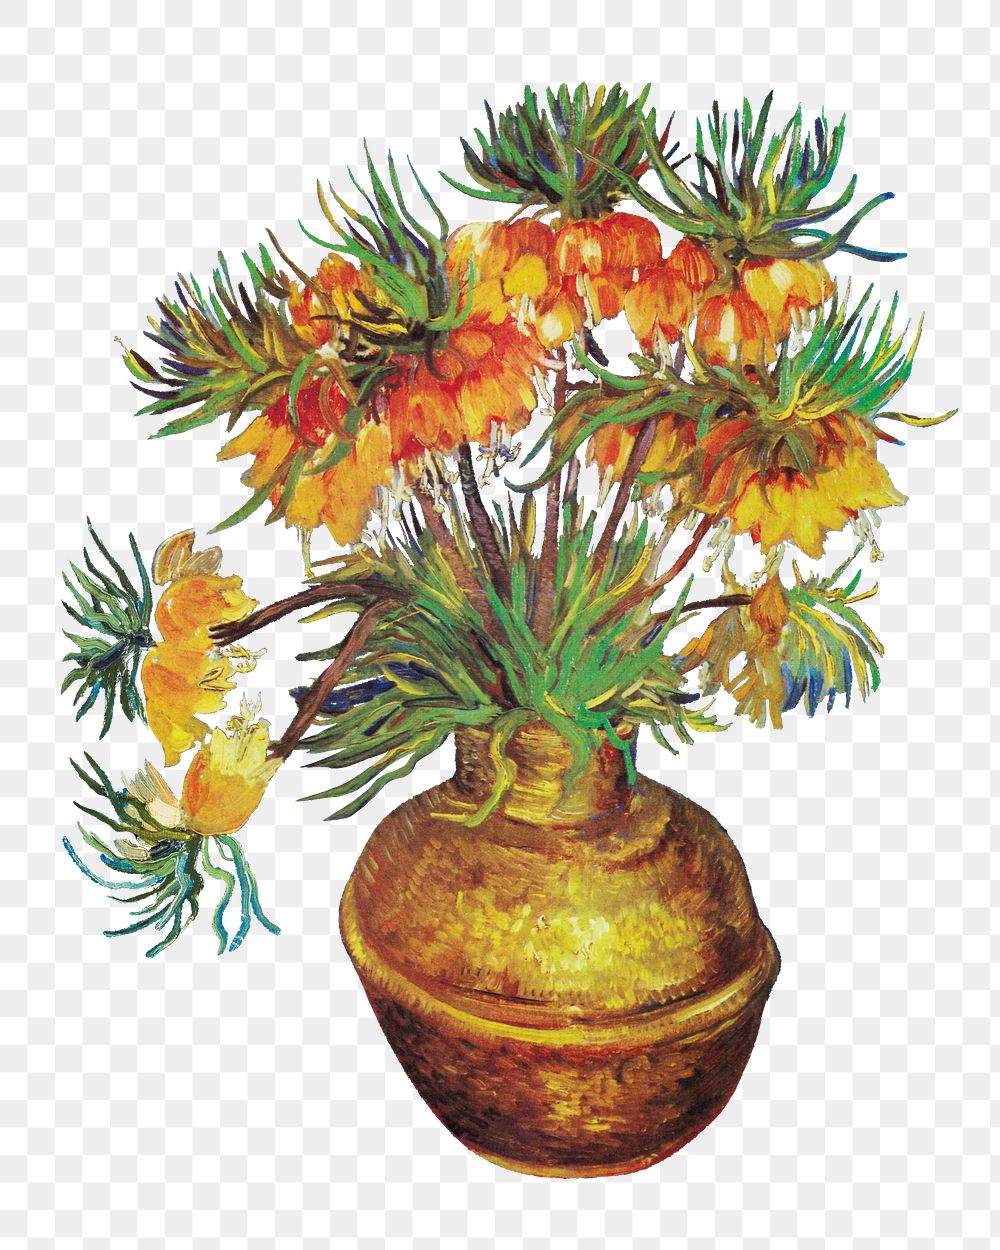 Png Imperial Fritillaries in a Copper Vase sticker, Van Gogh-inspired famous flower illustration on transparent background